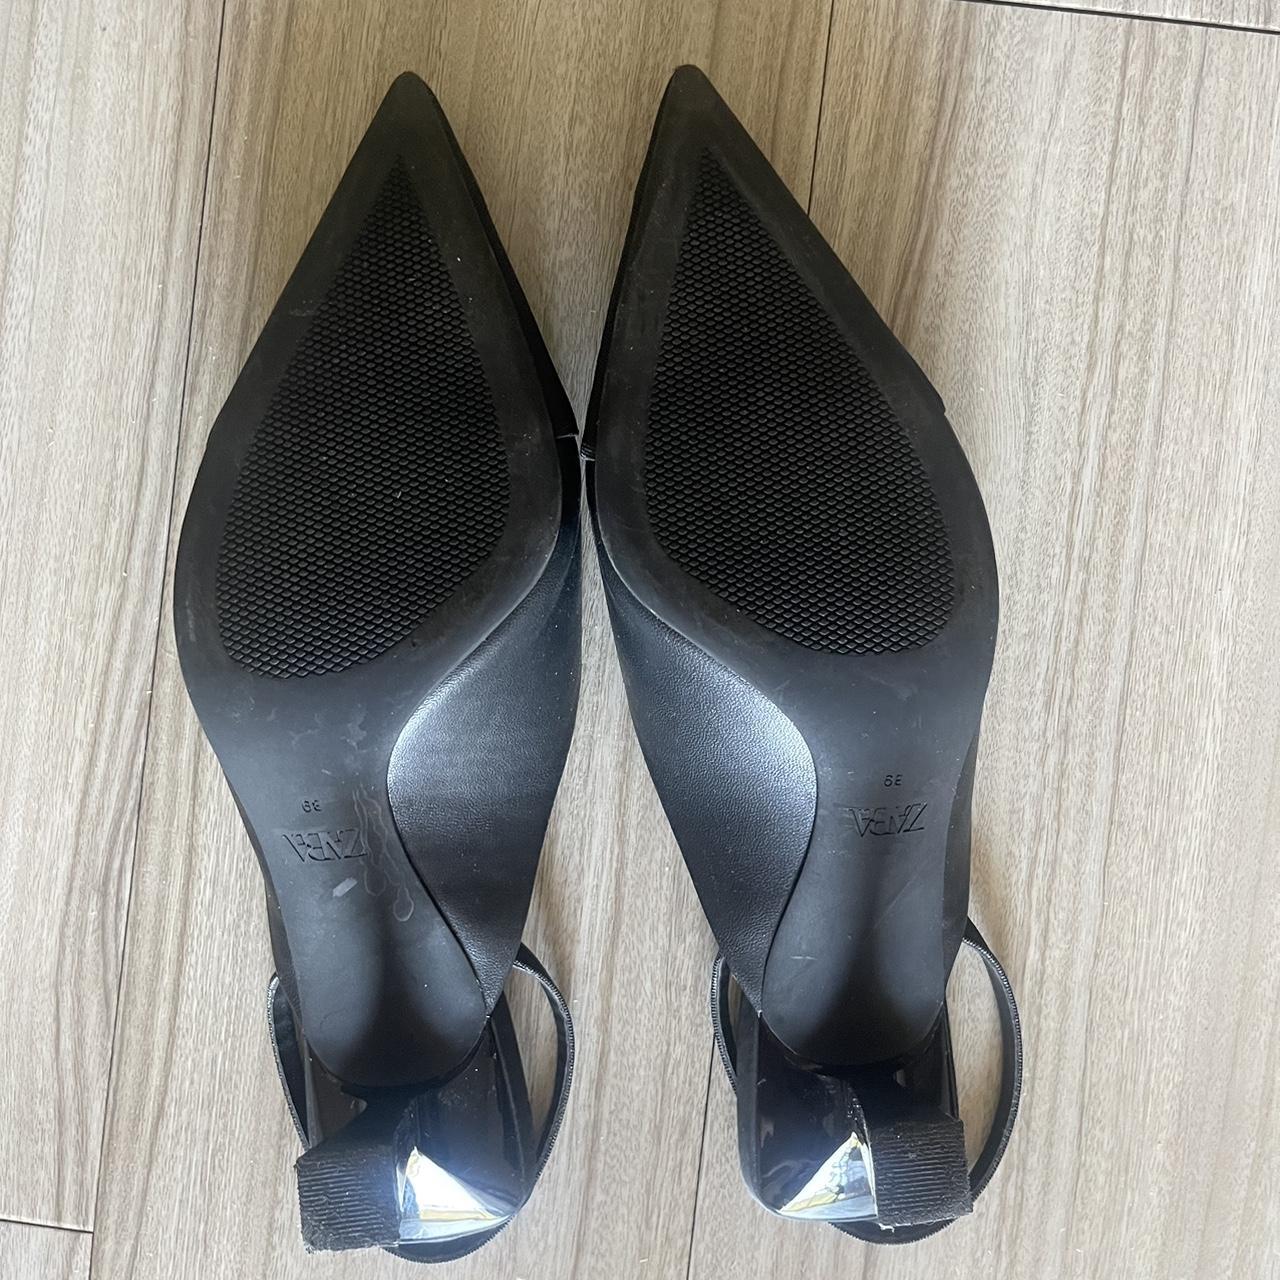 Zara Women's Black and Gold Courts (4)